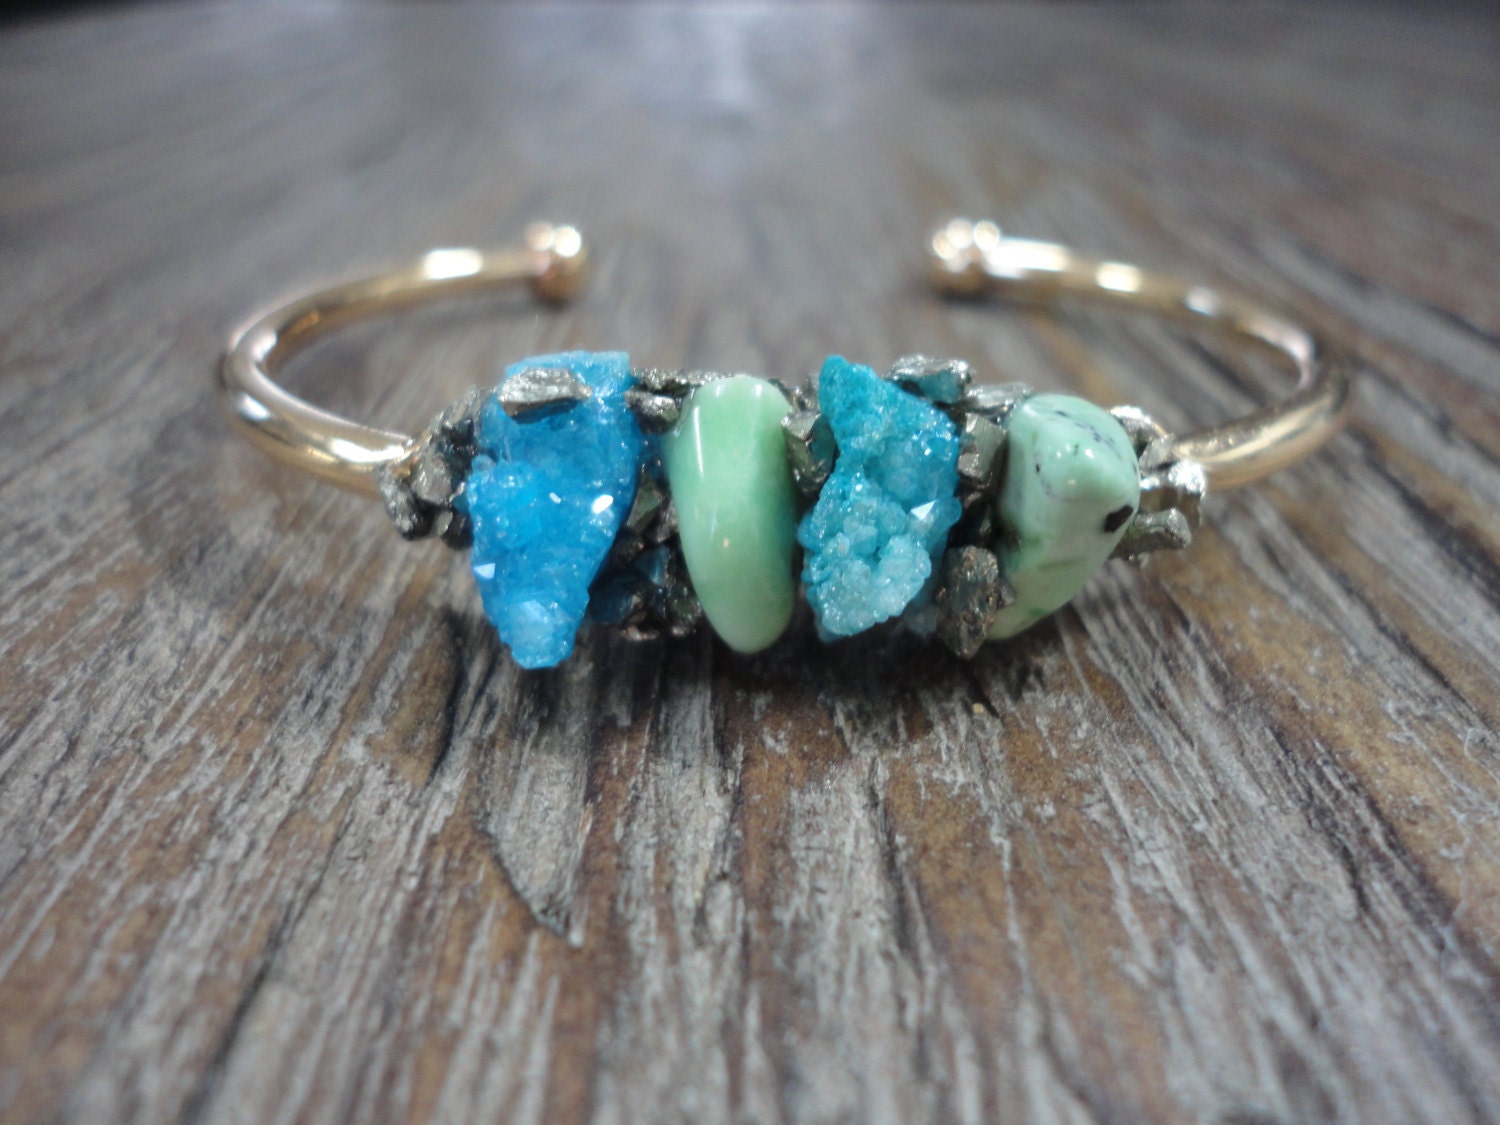 Druzy Agate and Green Turquoise with Pyrite Gold Cuff Open Bangle Bracelet/Modern Boho Bangle/Raw Crushed Pyrite